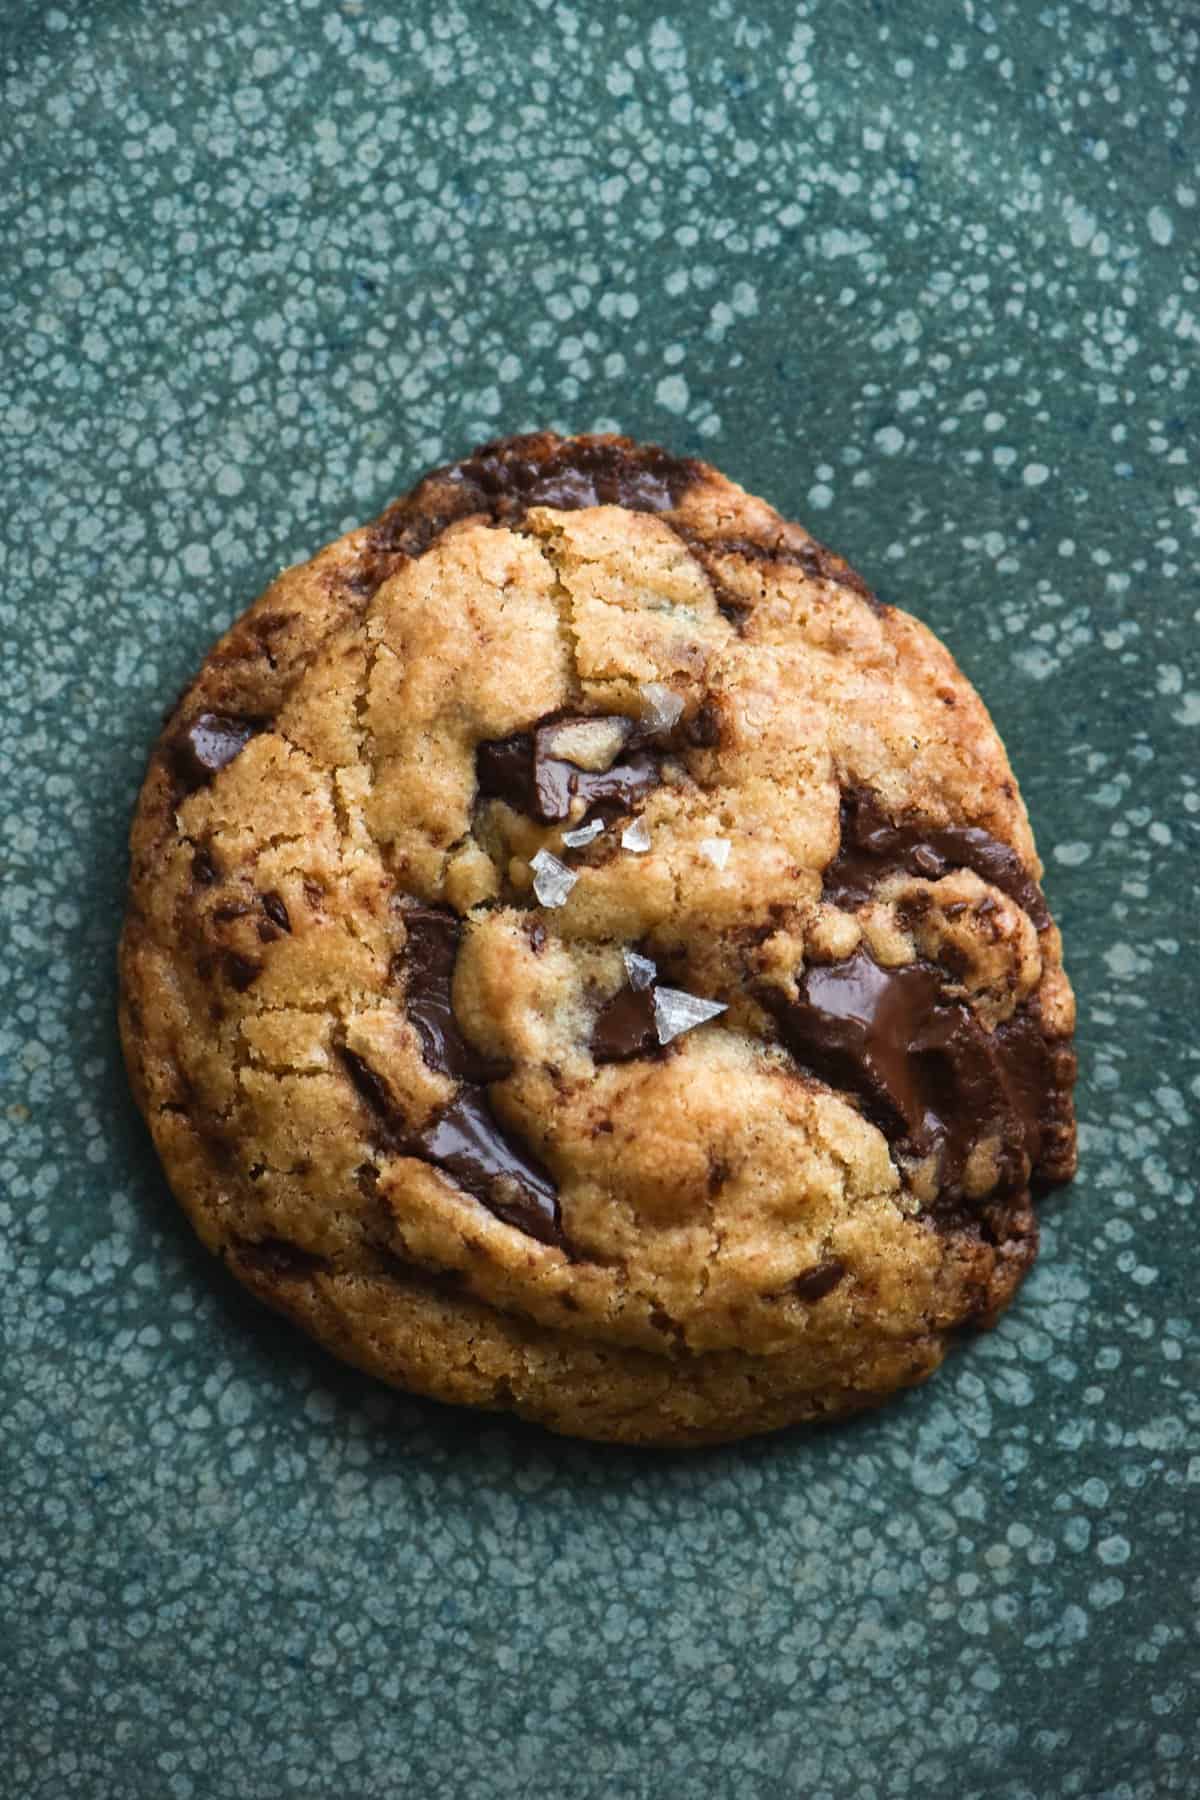 An aerial view of a gluten free vegan choc chip cookie atop a turquoise green ceramic speckled plate. The cookie is studded with melted dark chocolate and topped with sea salt flakes